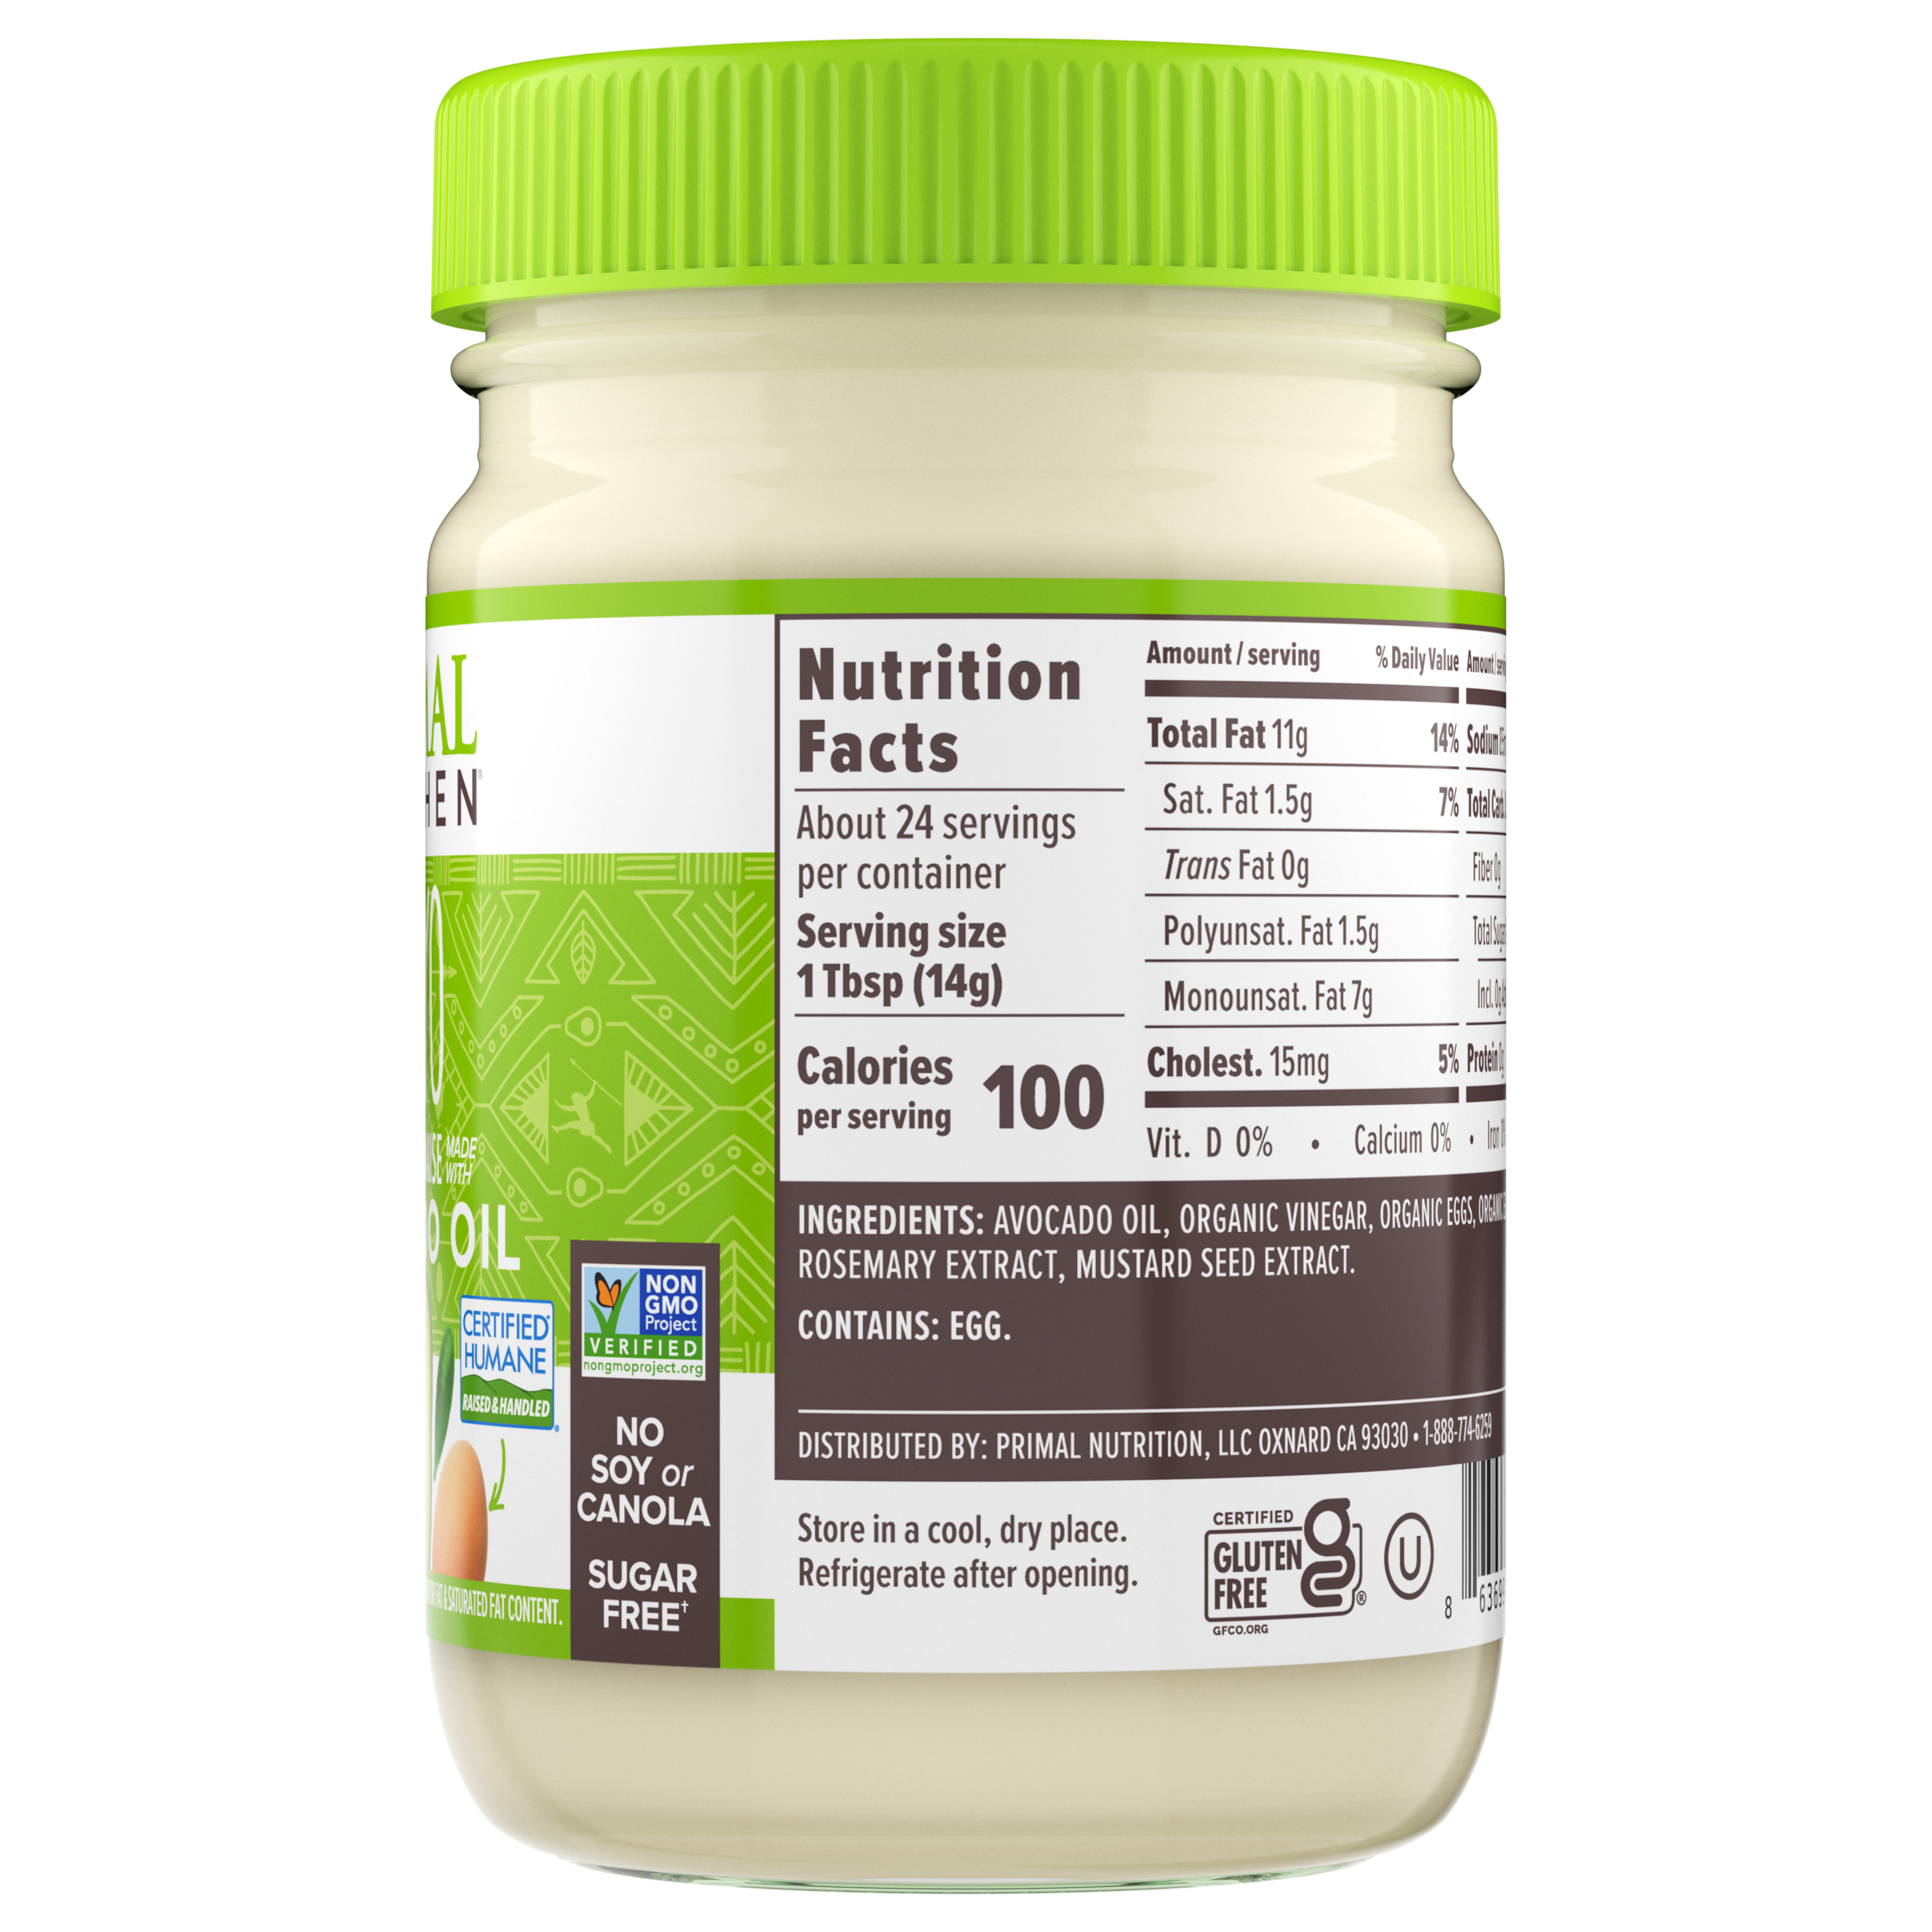 Nutrition label of Primal Kitchen Mayo made with Avocado Oil in a glass jar